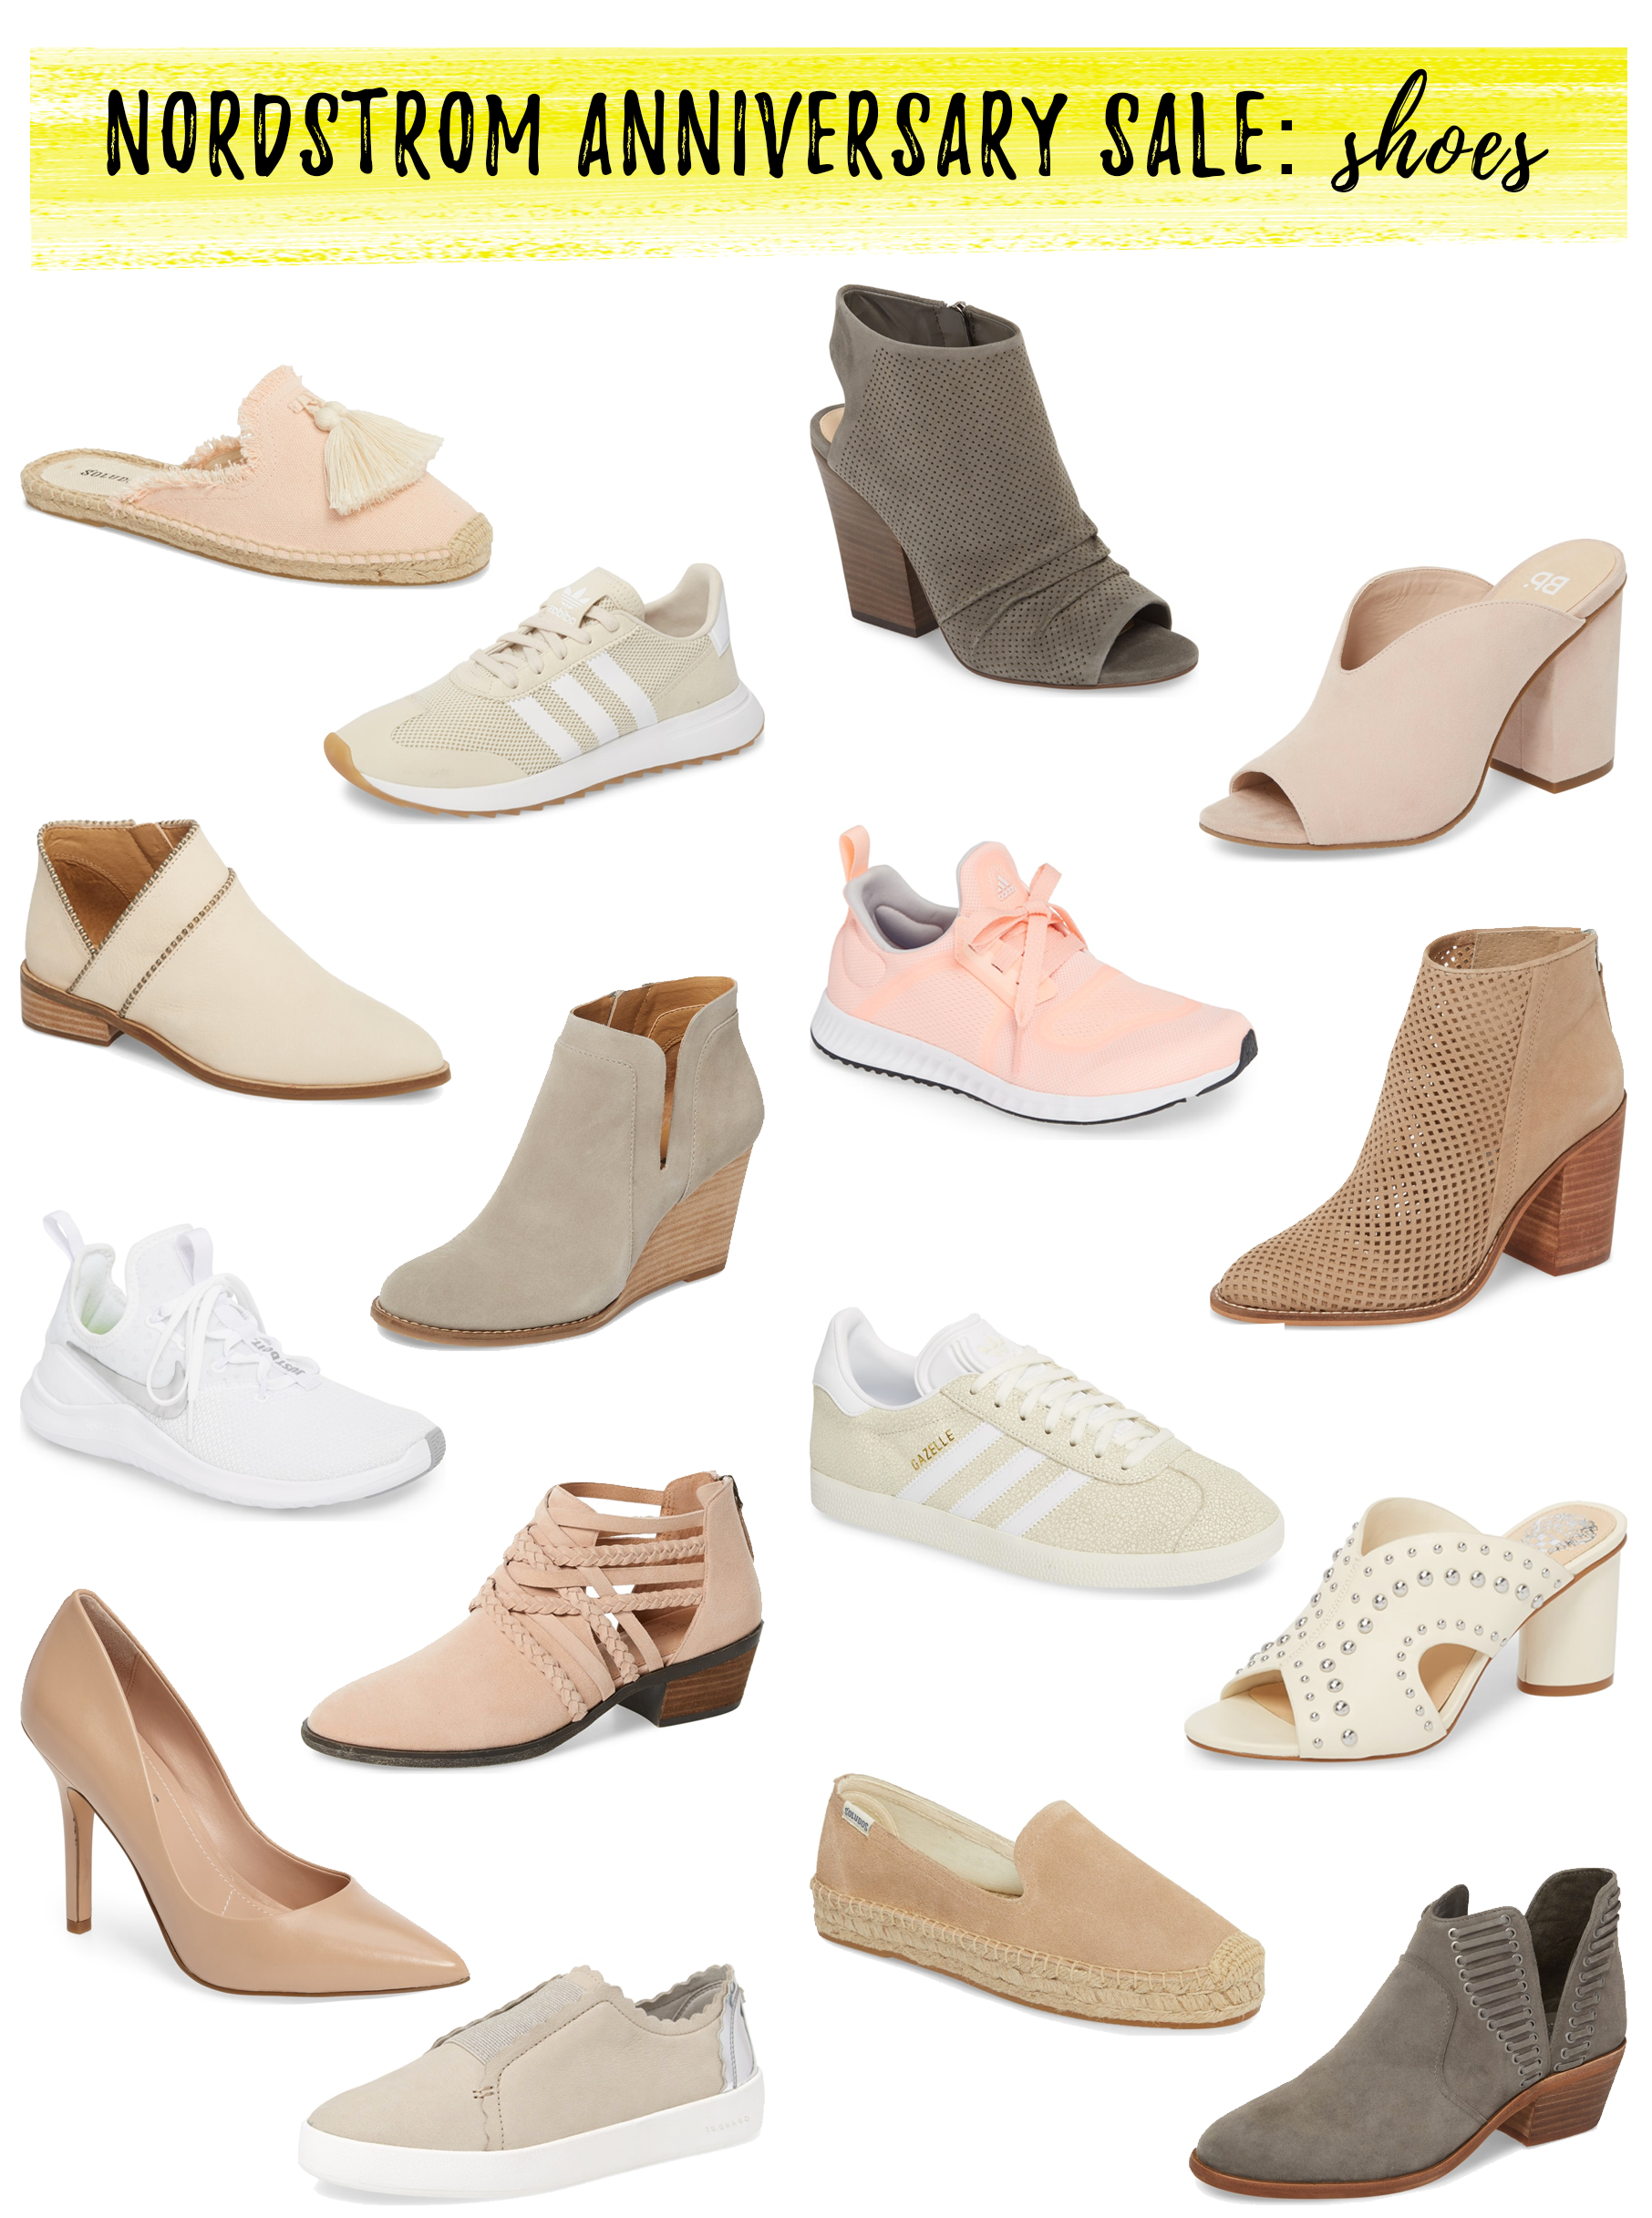 Nordstrom Anniversary Sale: Shoes 